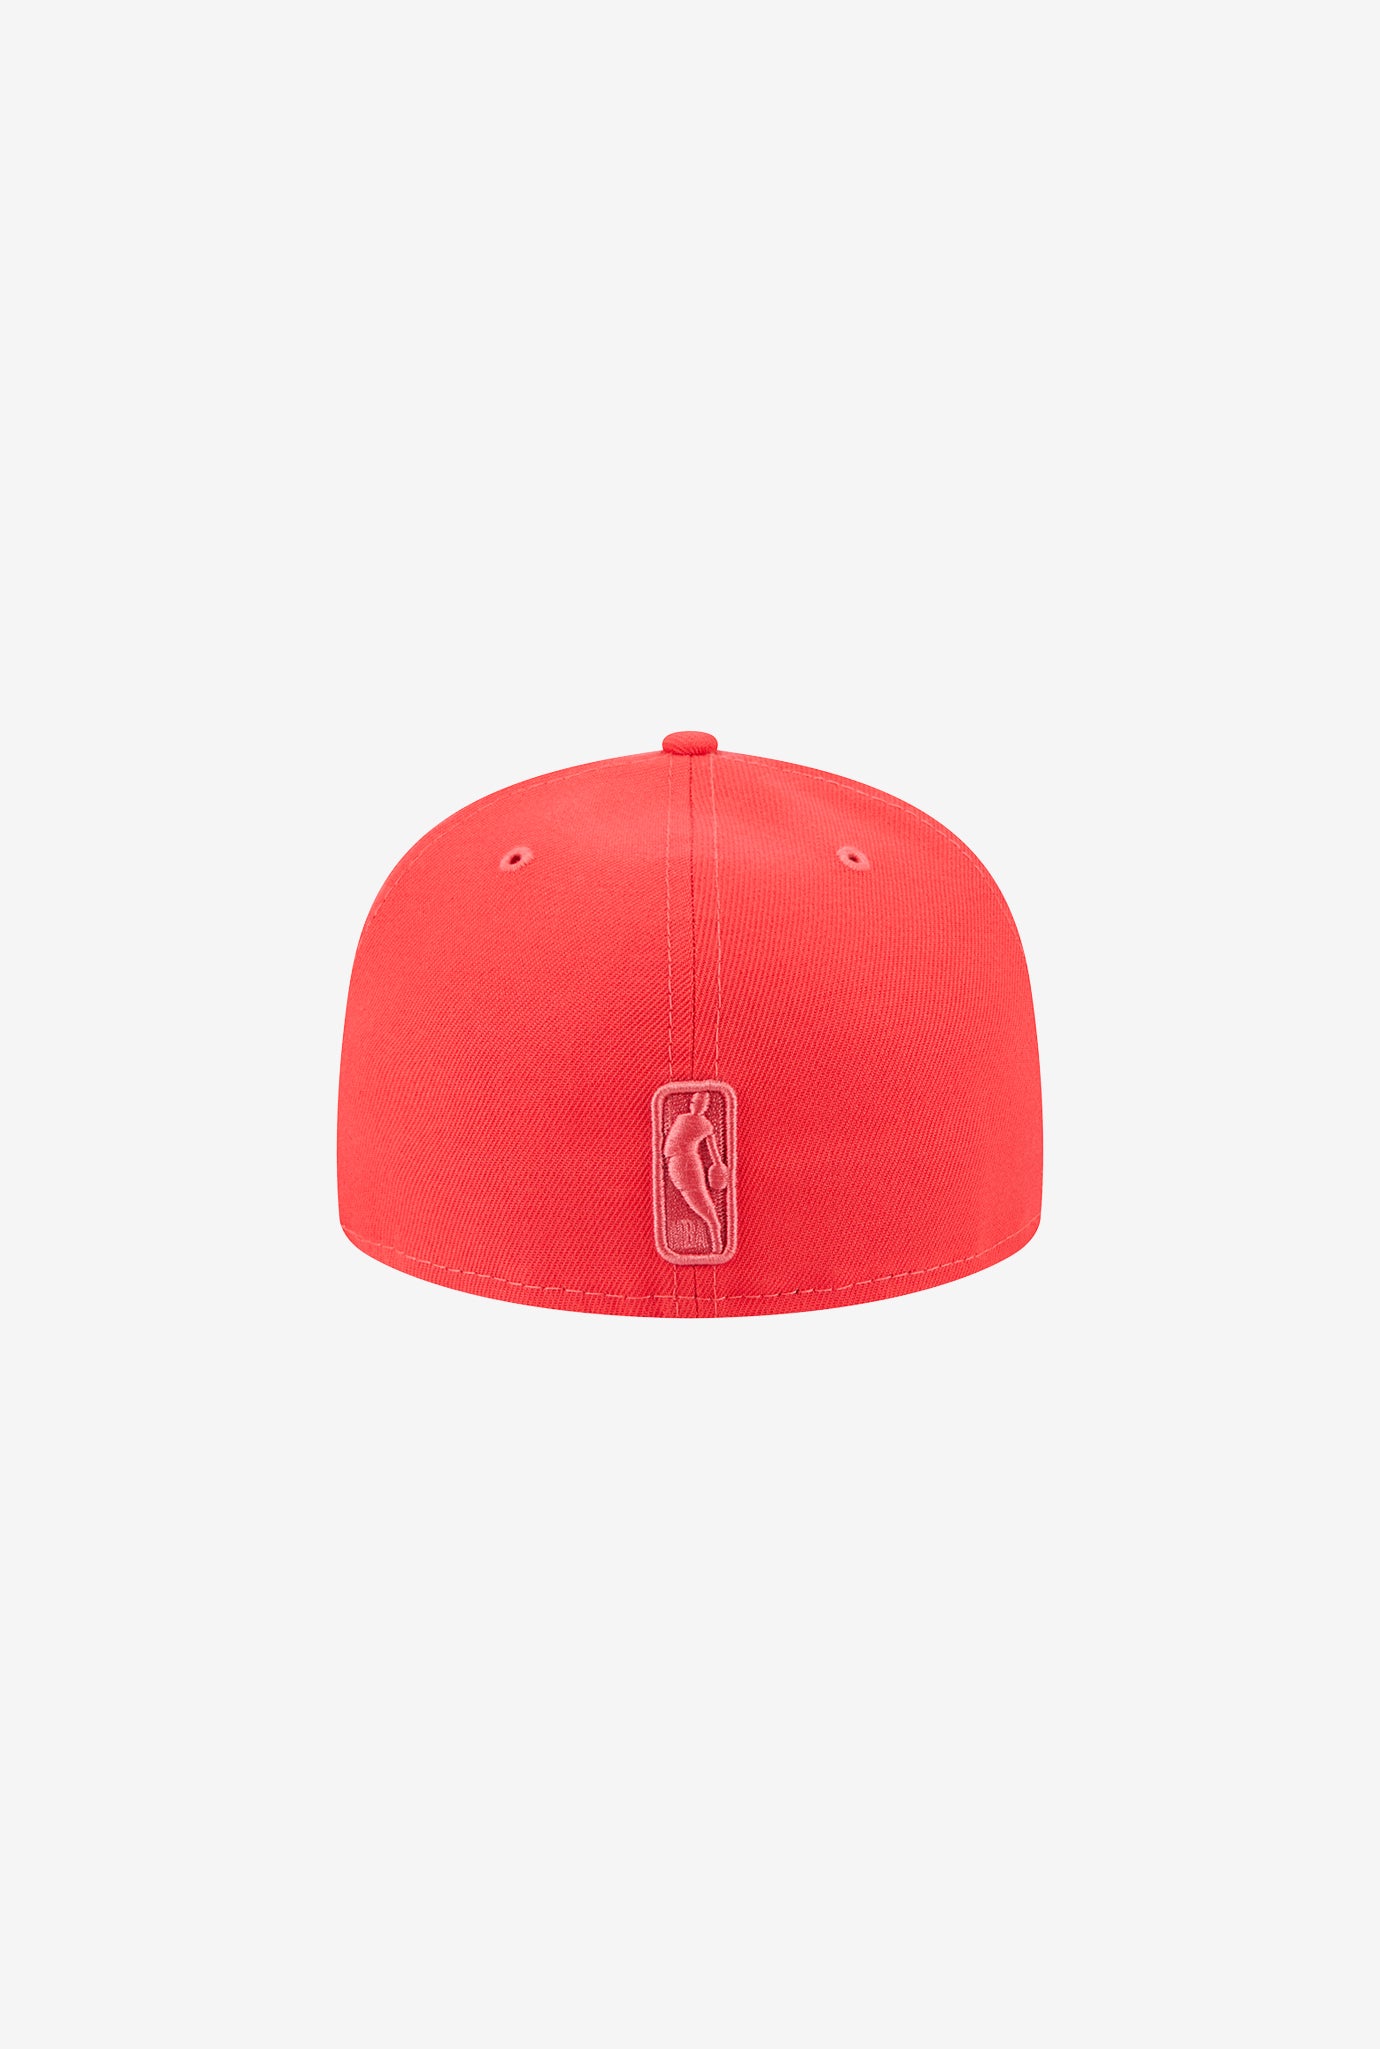 Toronto Raptors 59FIFTY Color Pack - Neon Red